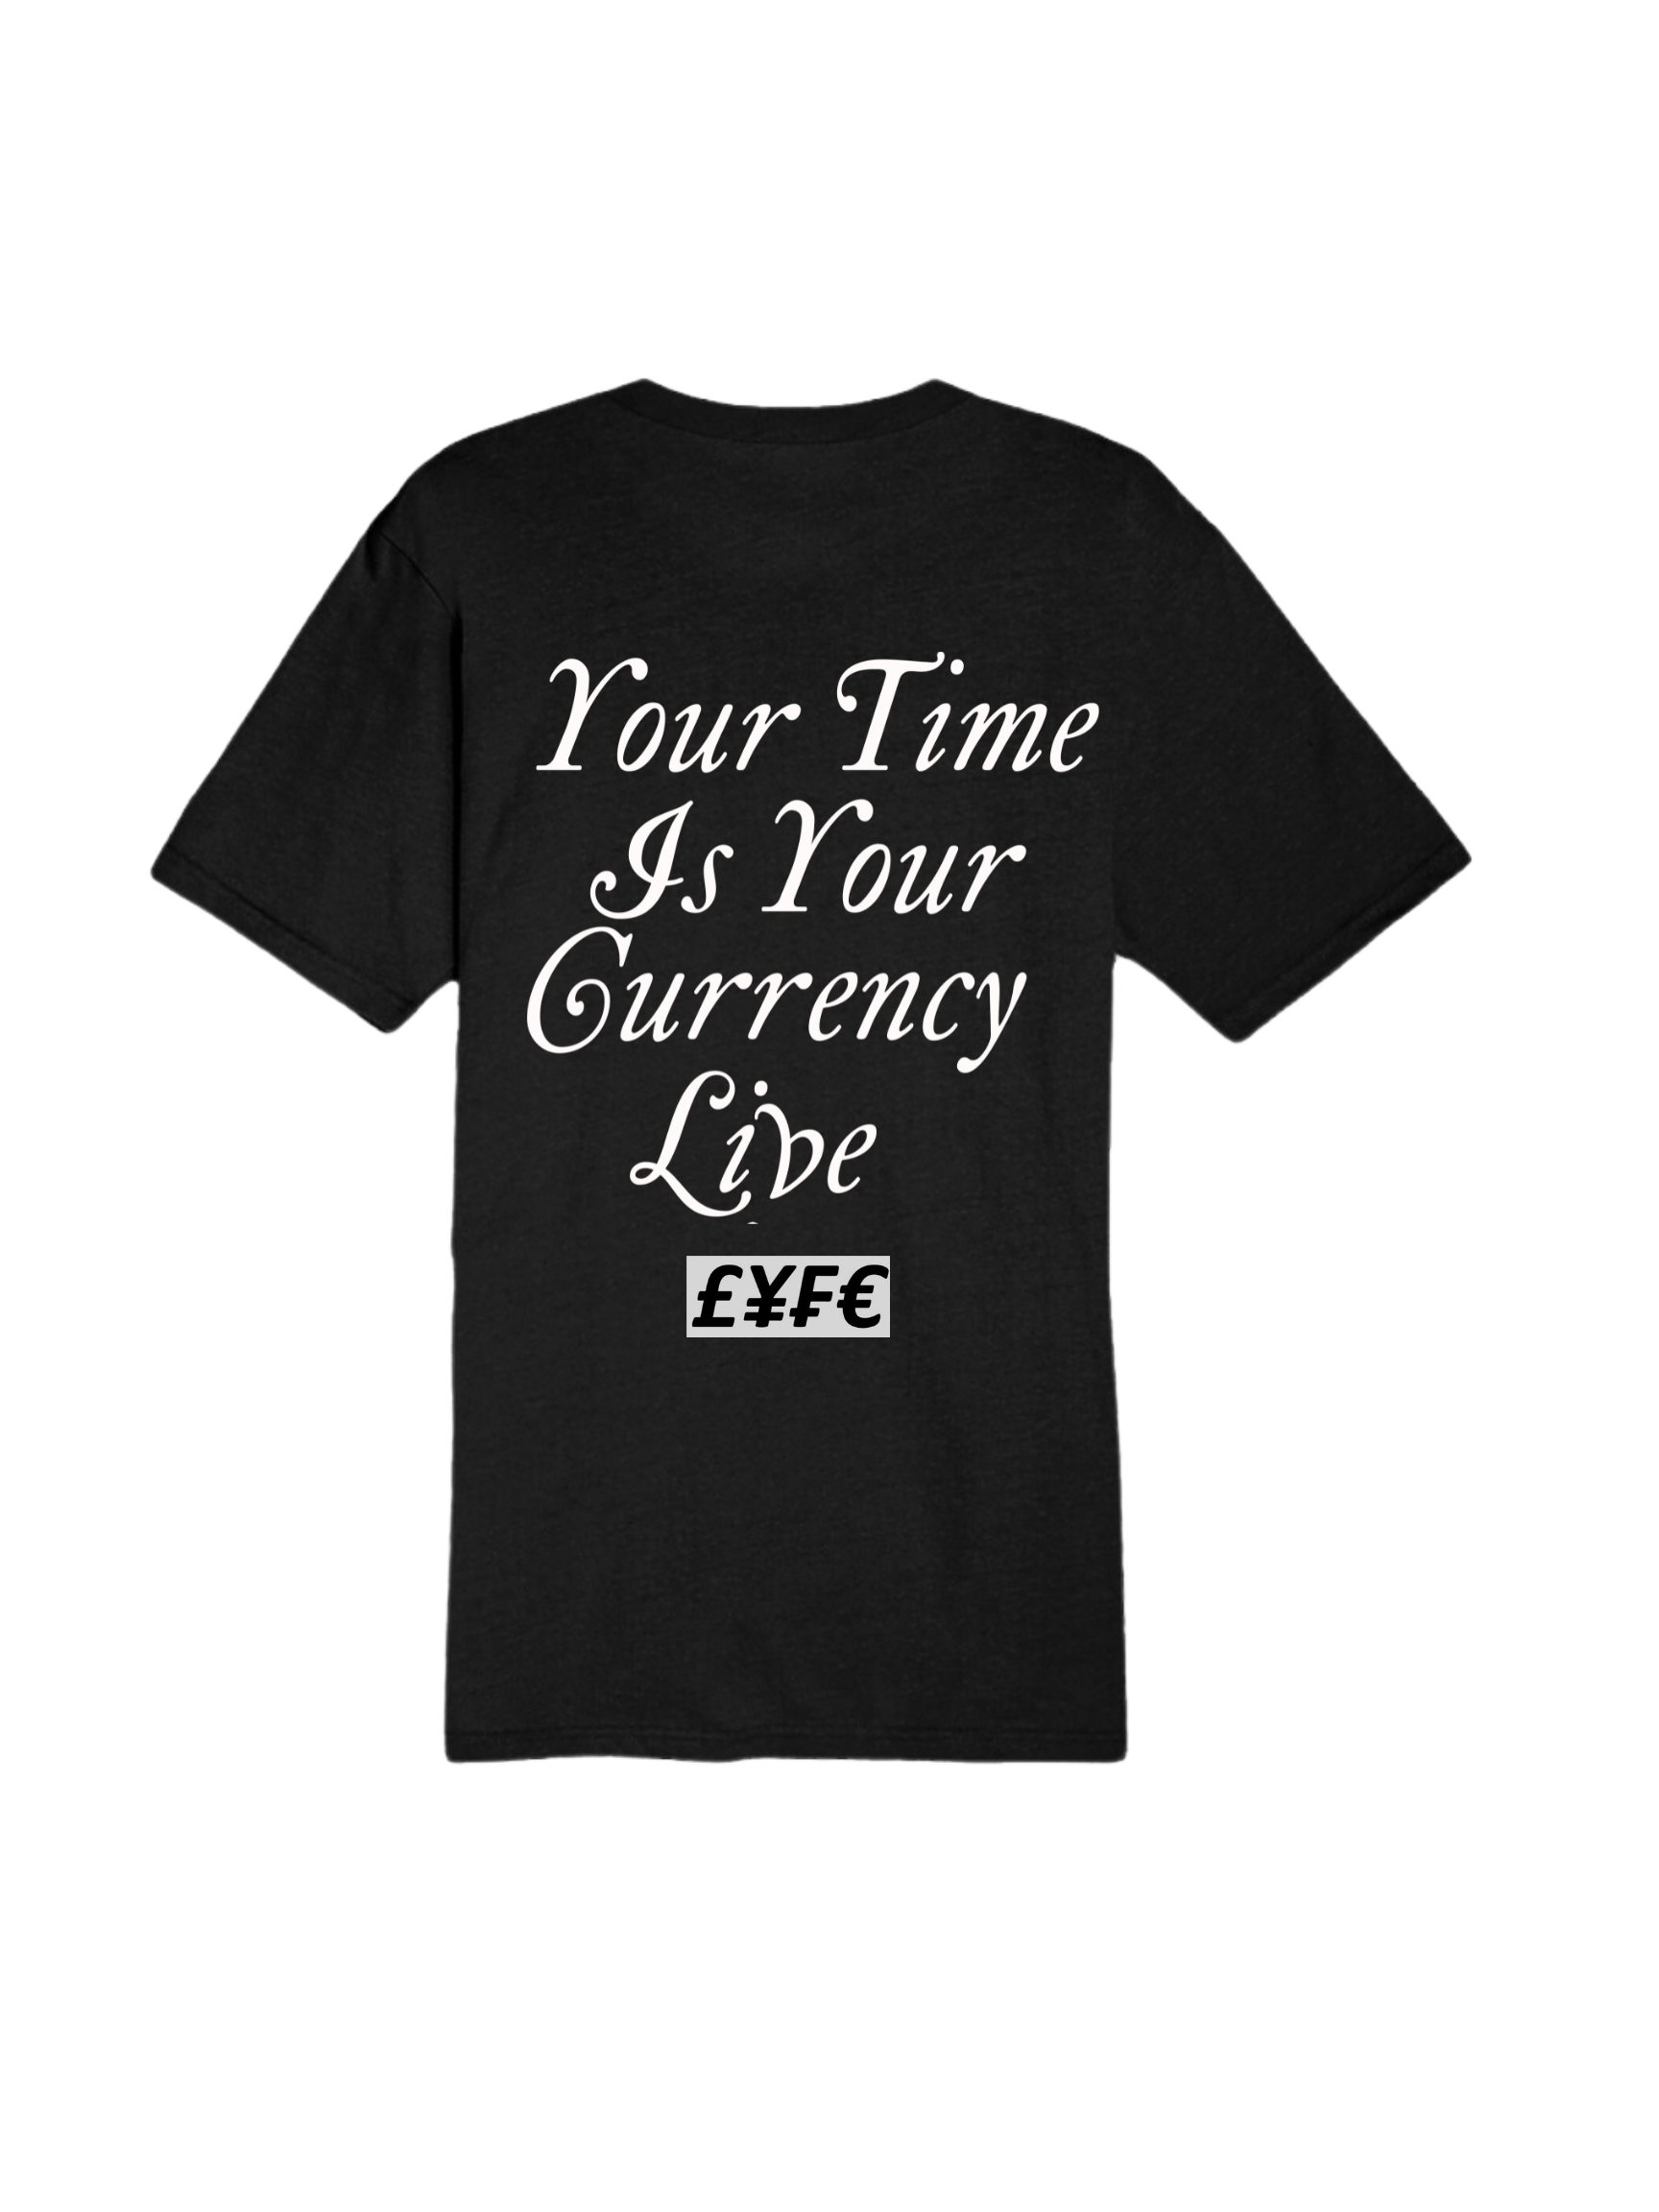 Black Crown LYFE "Your Time Is Your Currency" Tee